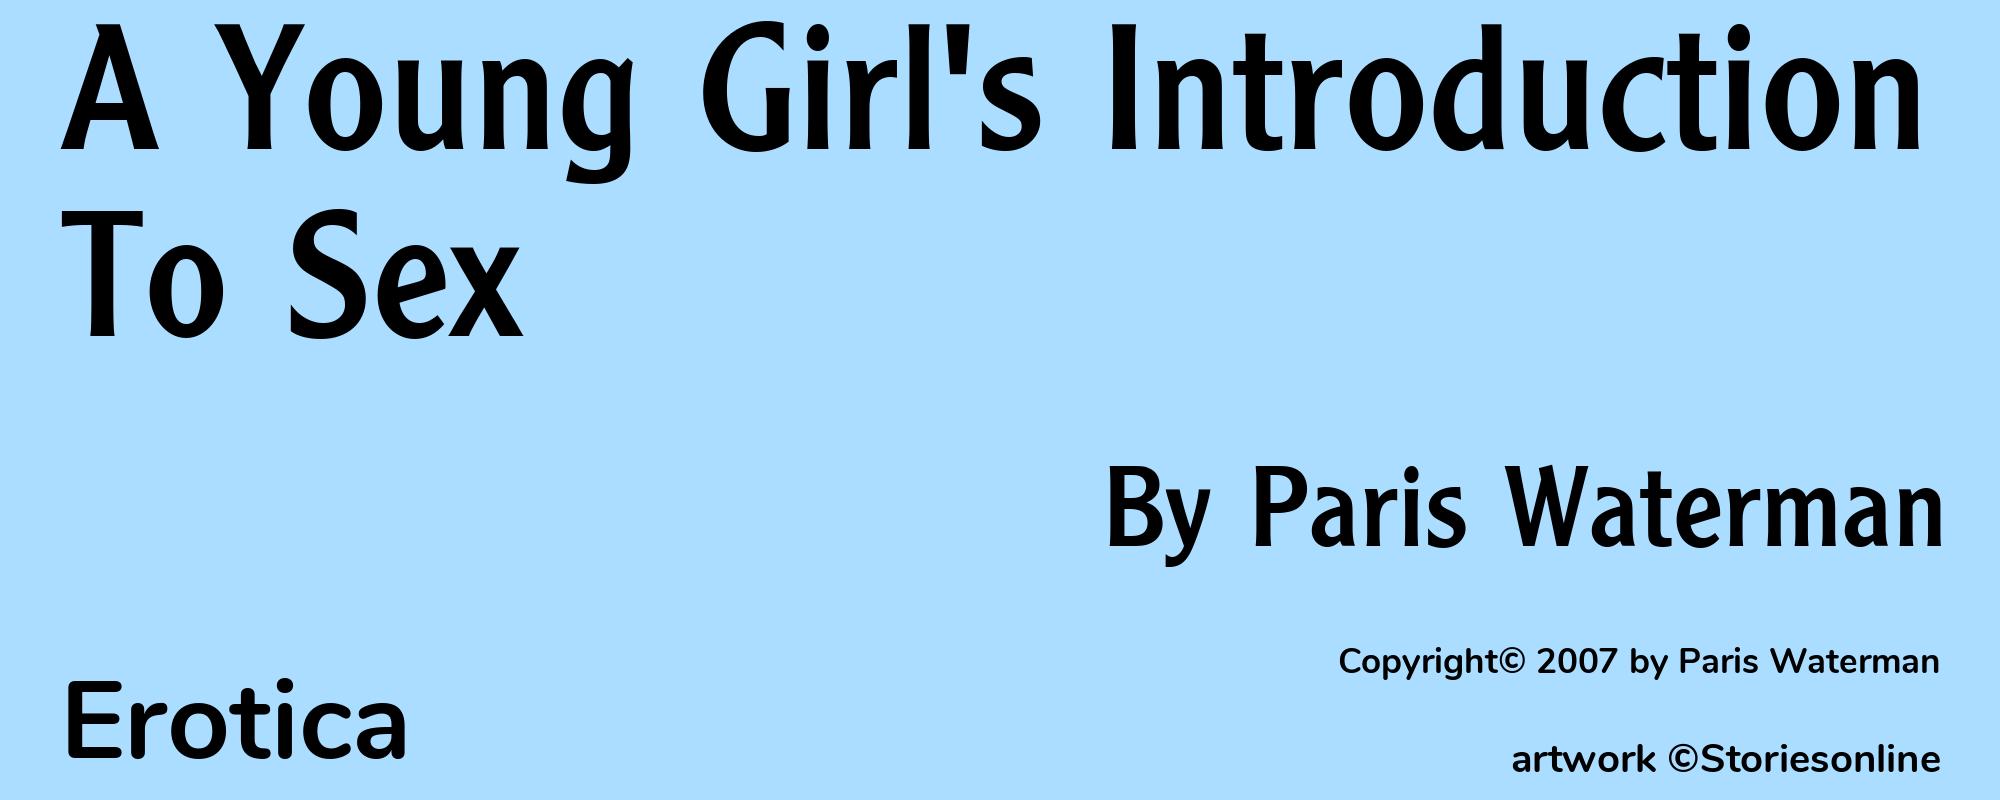 A Young Girl's Introduction To Sex - Cover